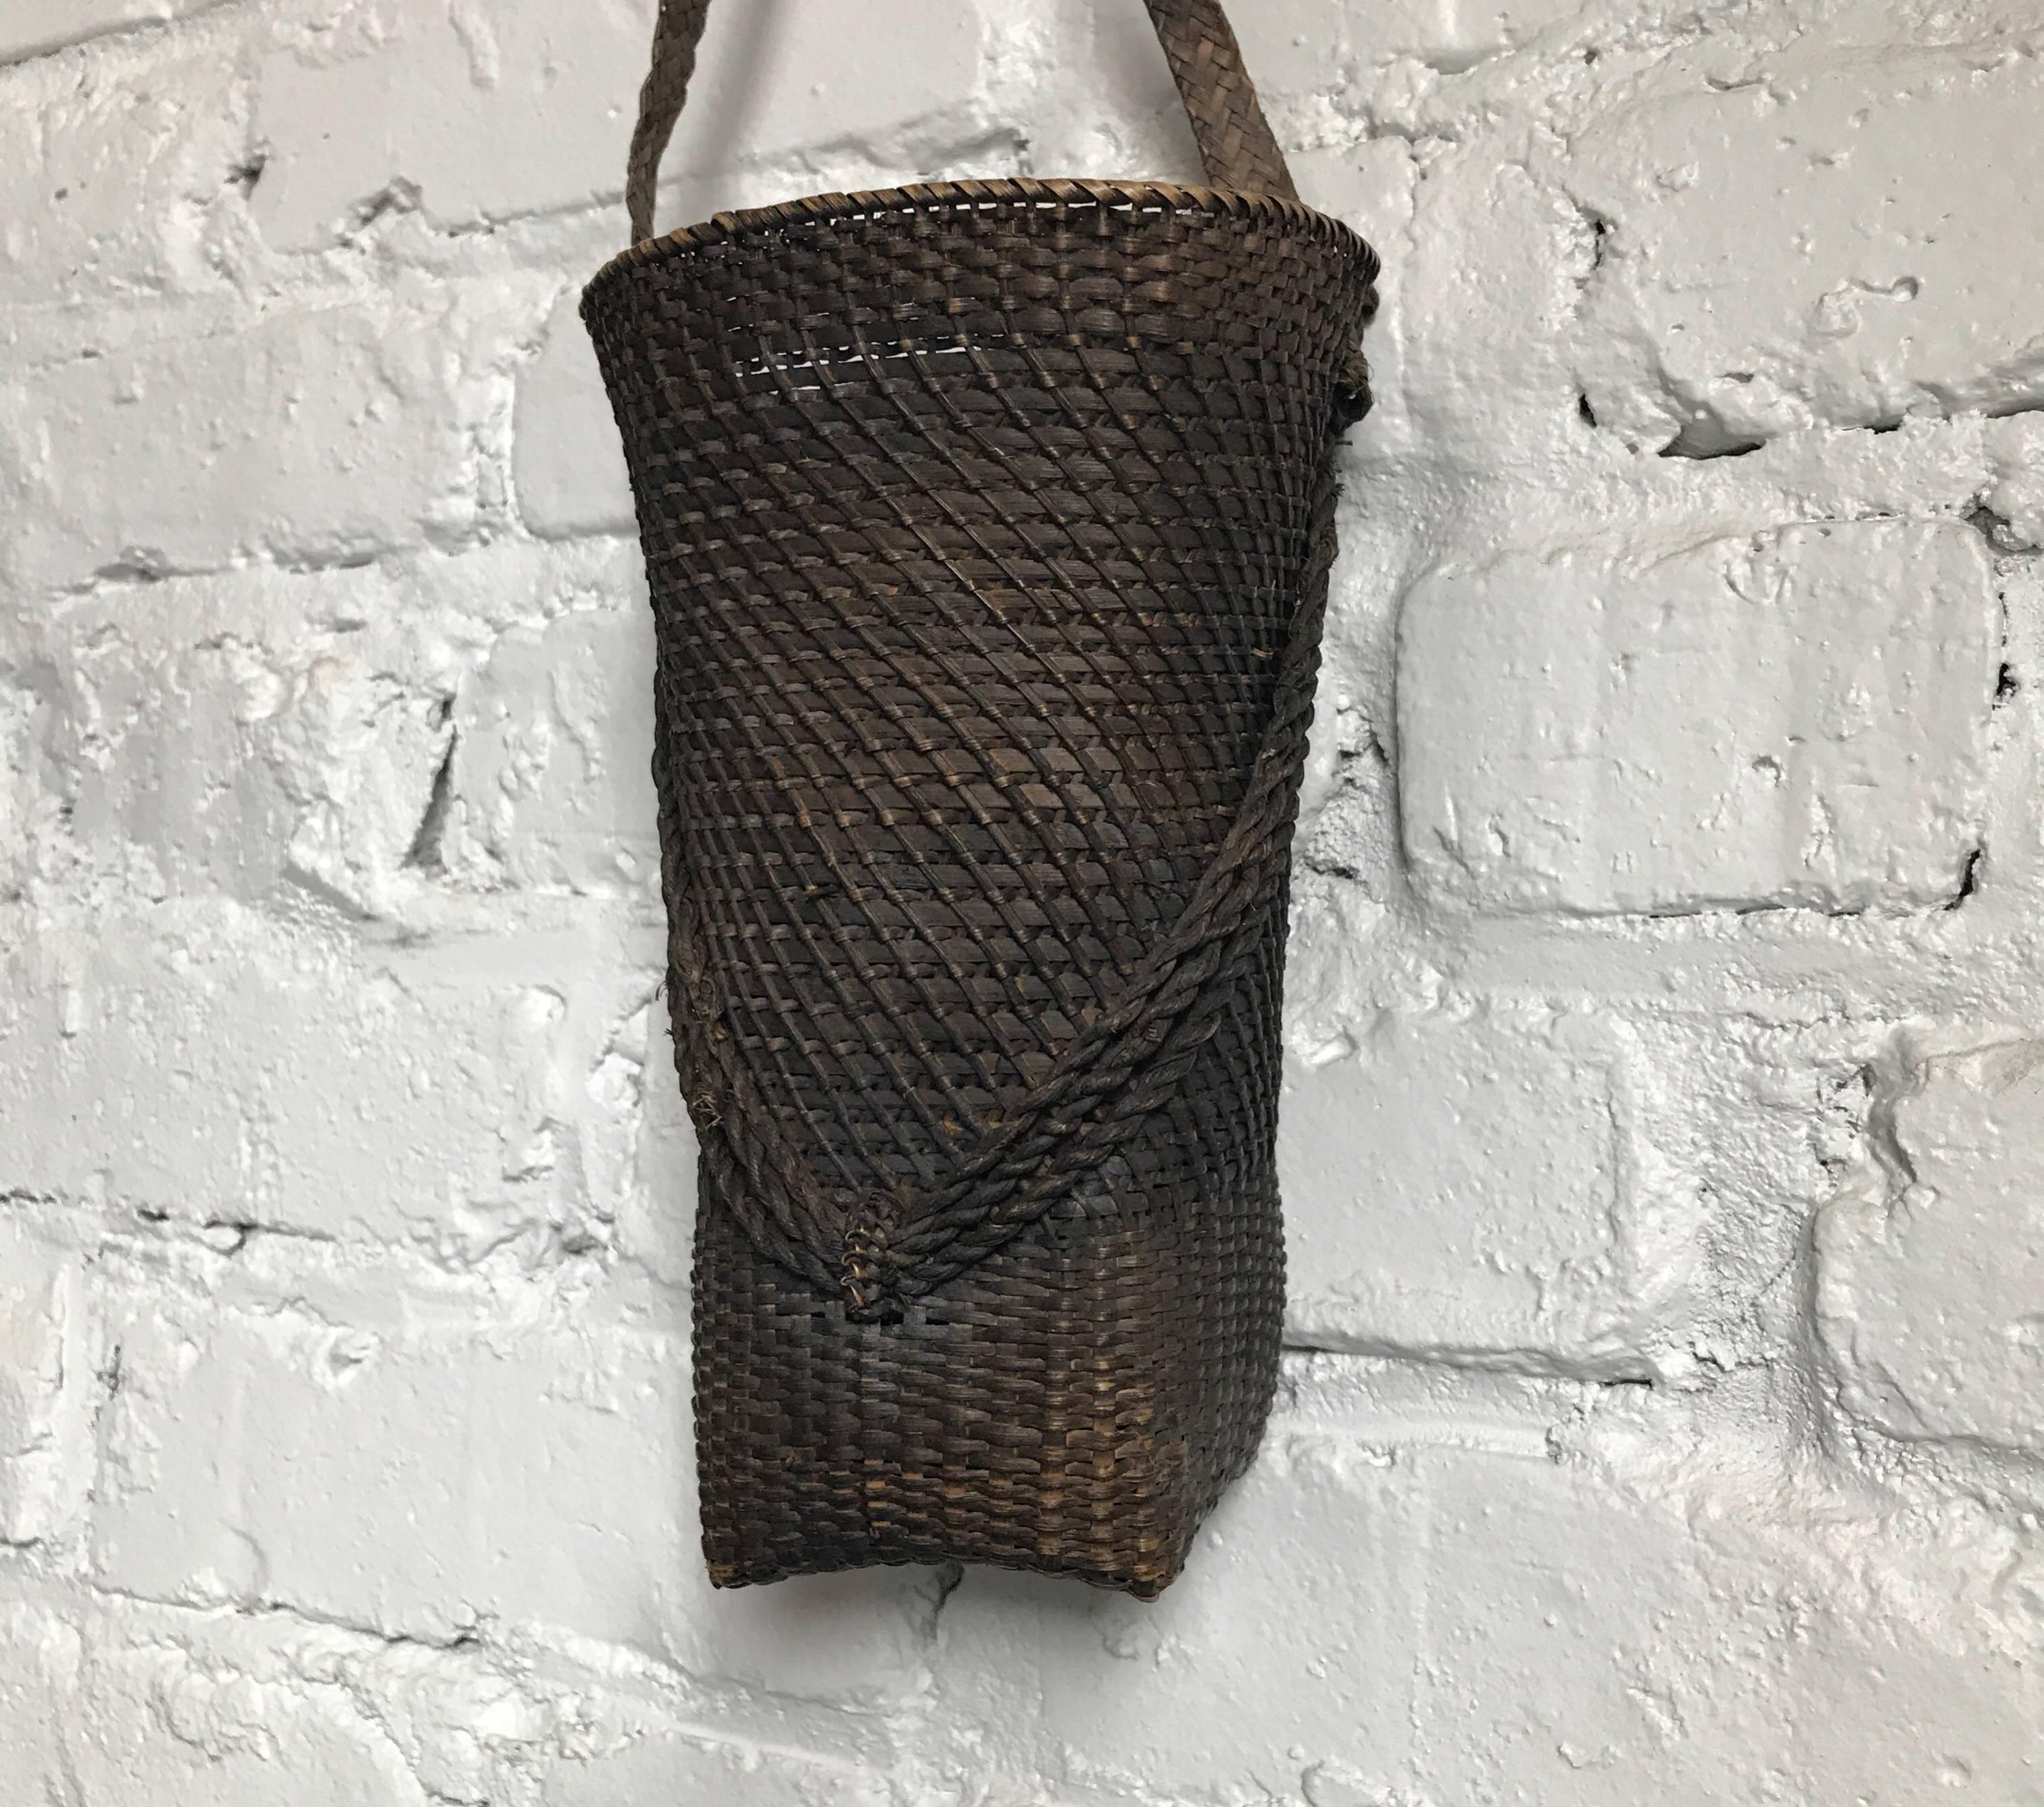 Late 19th Century Japanese Hand-Woven Basket with Woven Strap 10